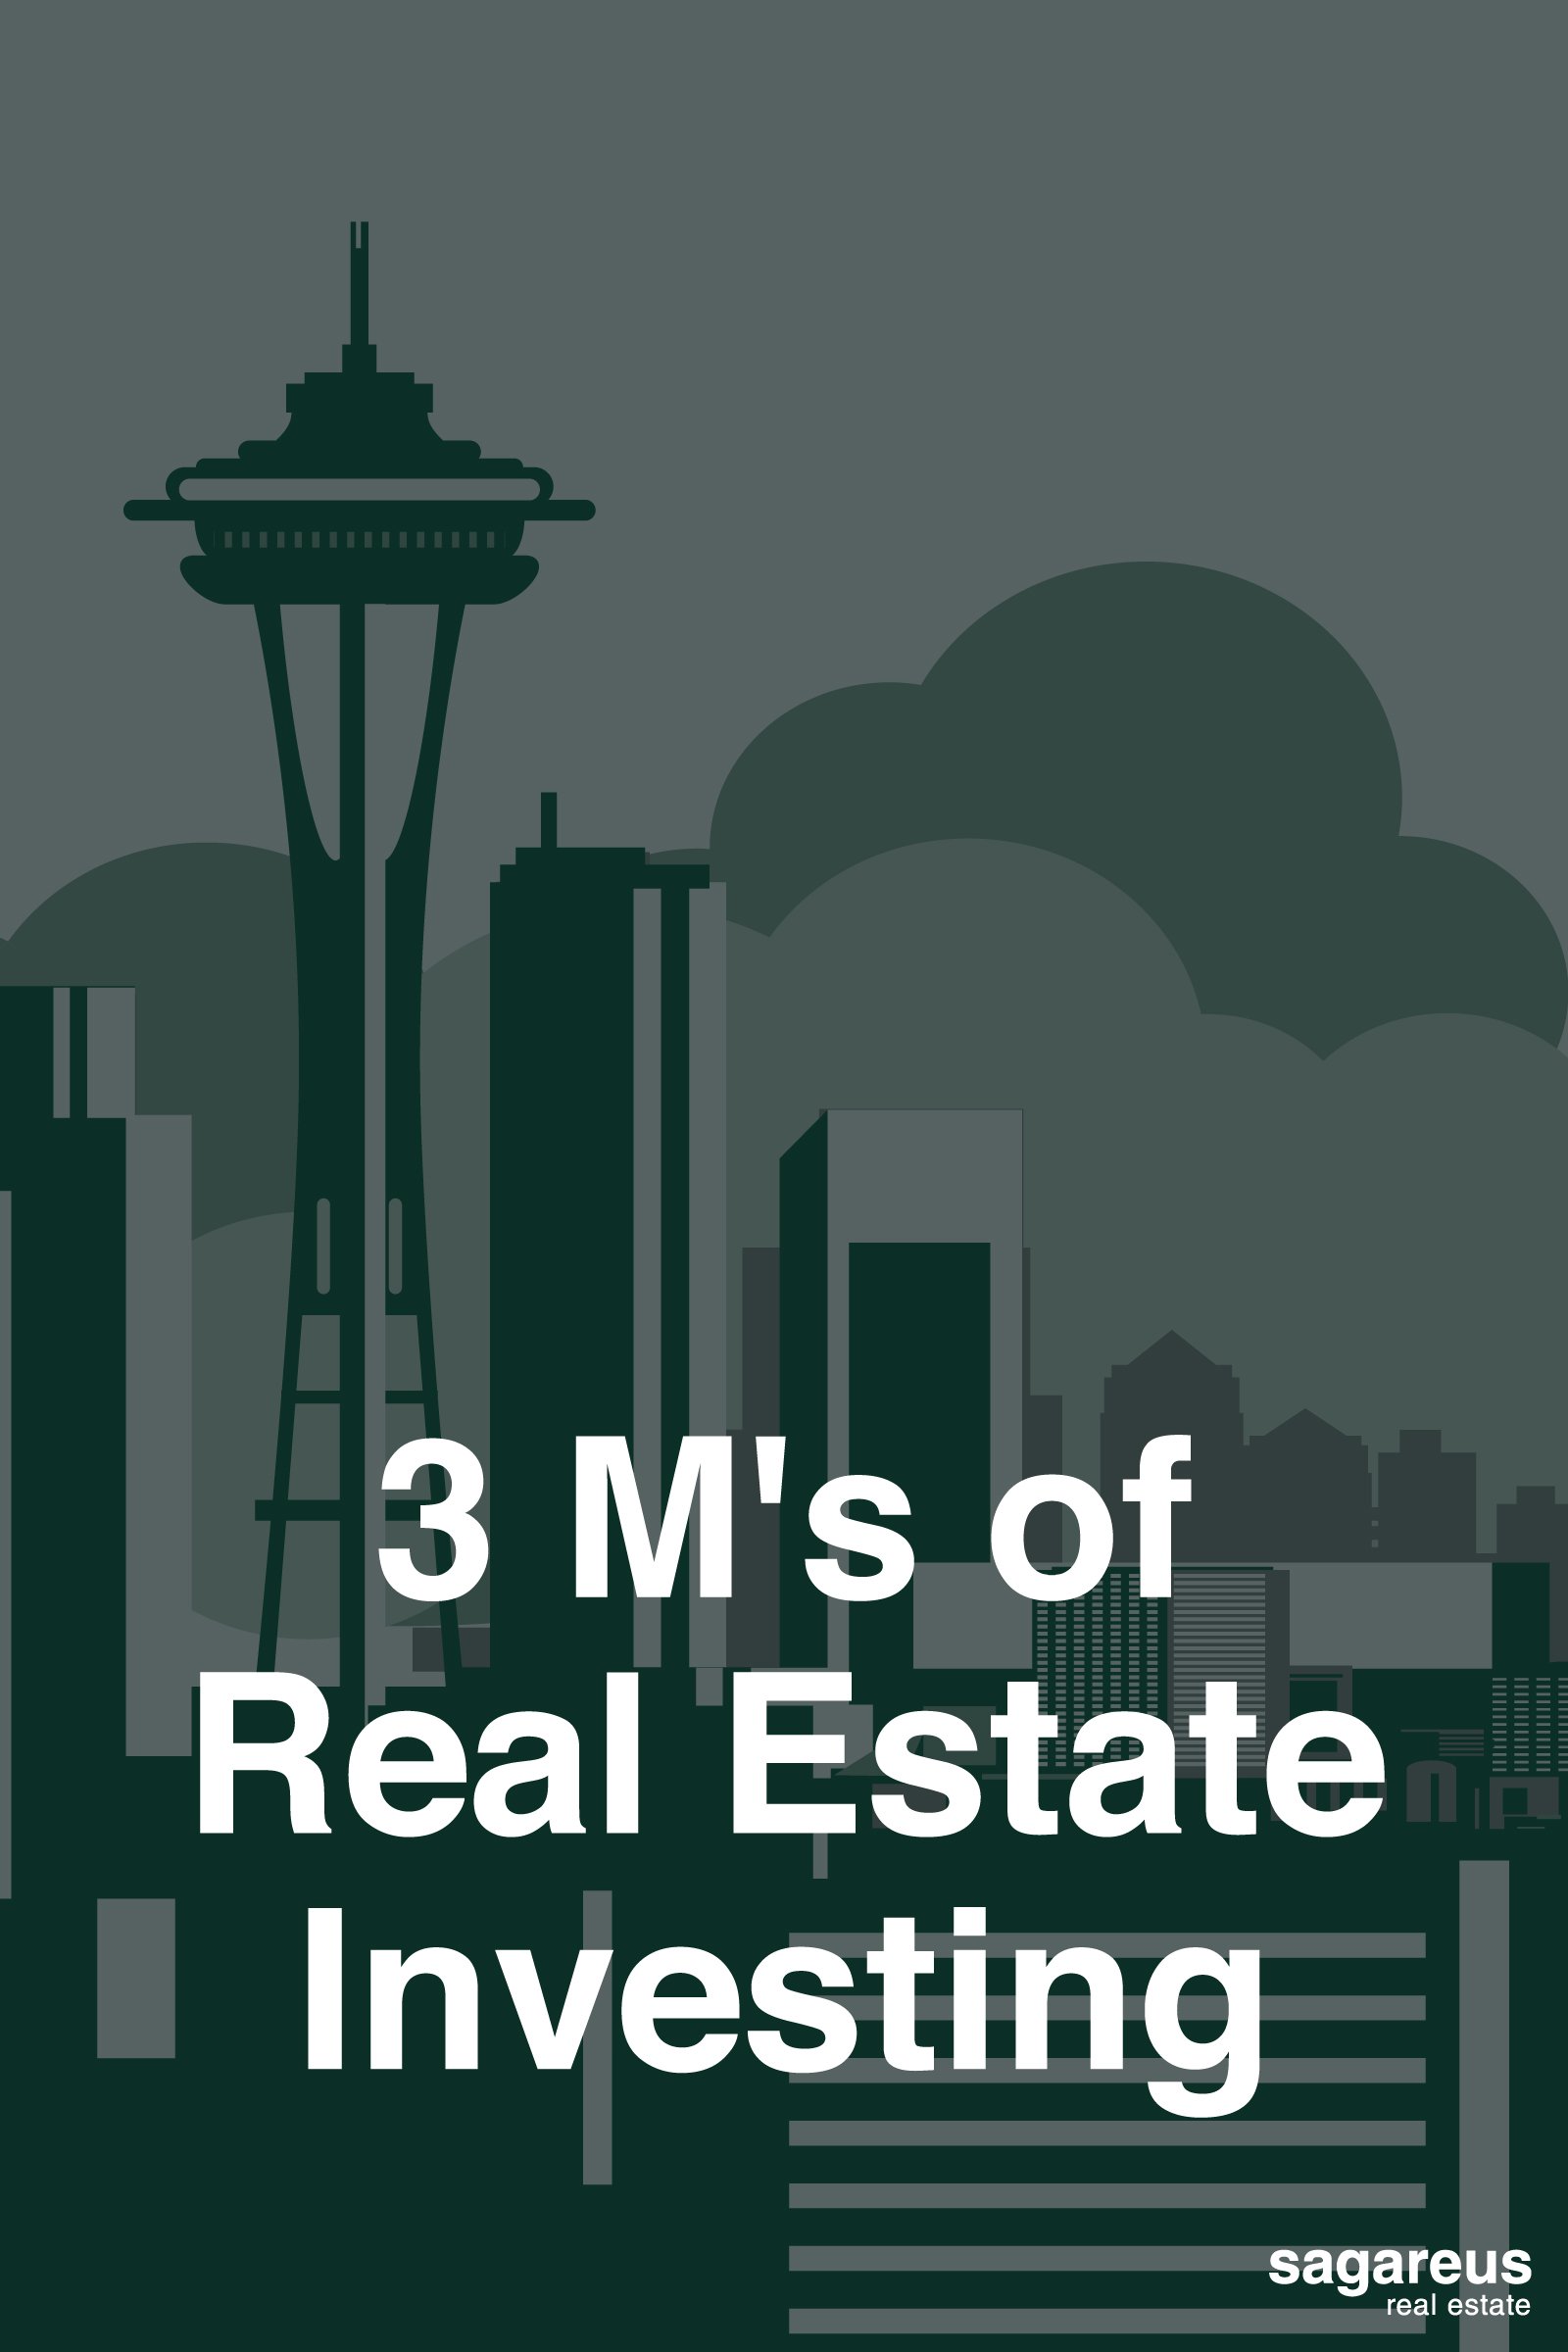 3 Ms of Real Estate Investing ebook cover